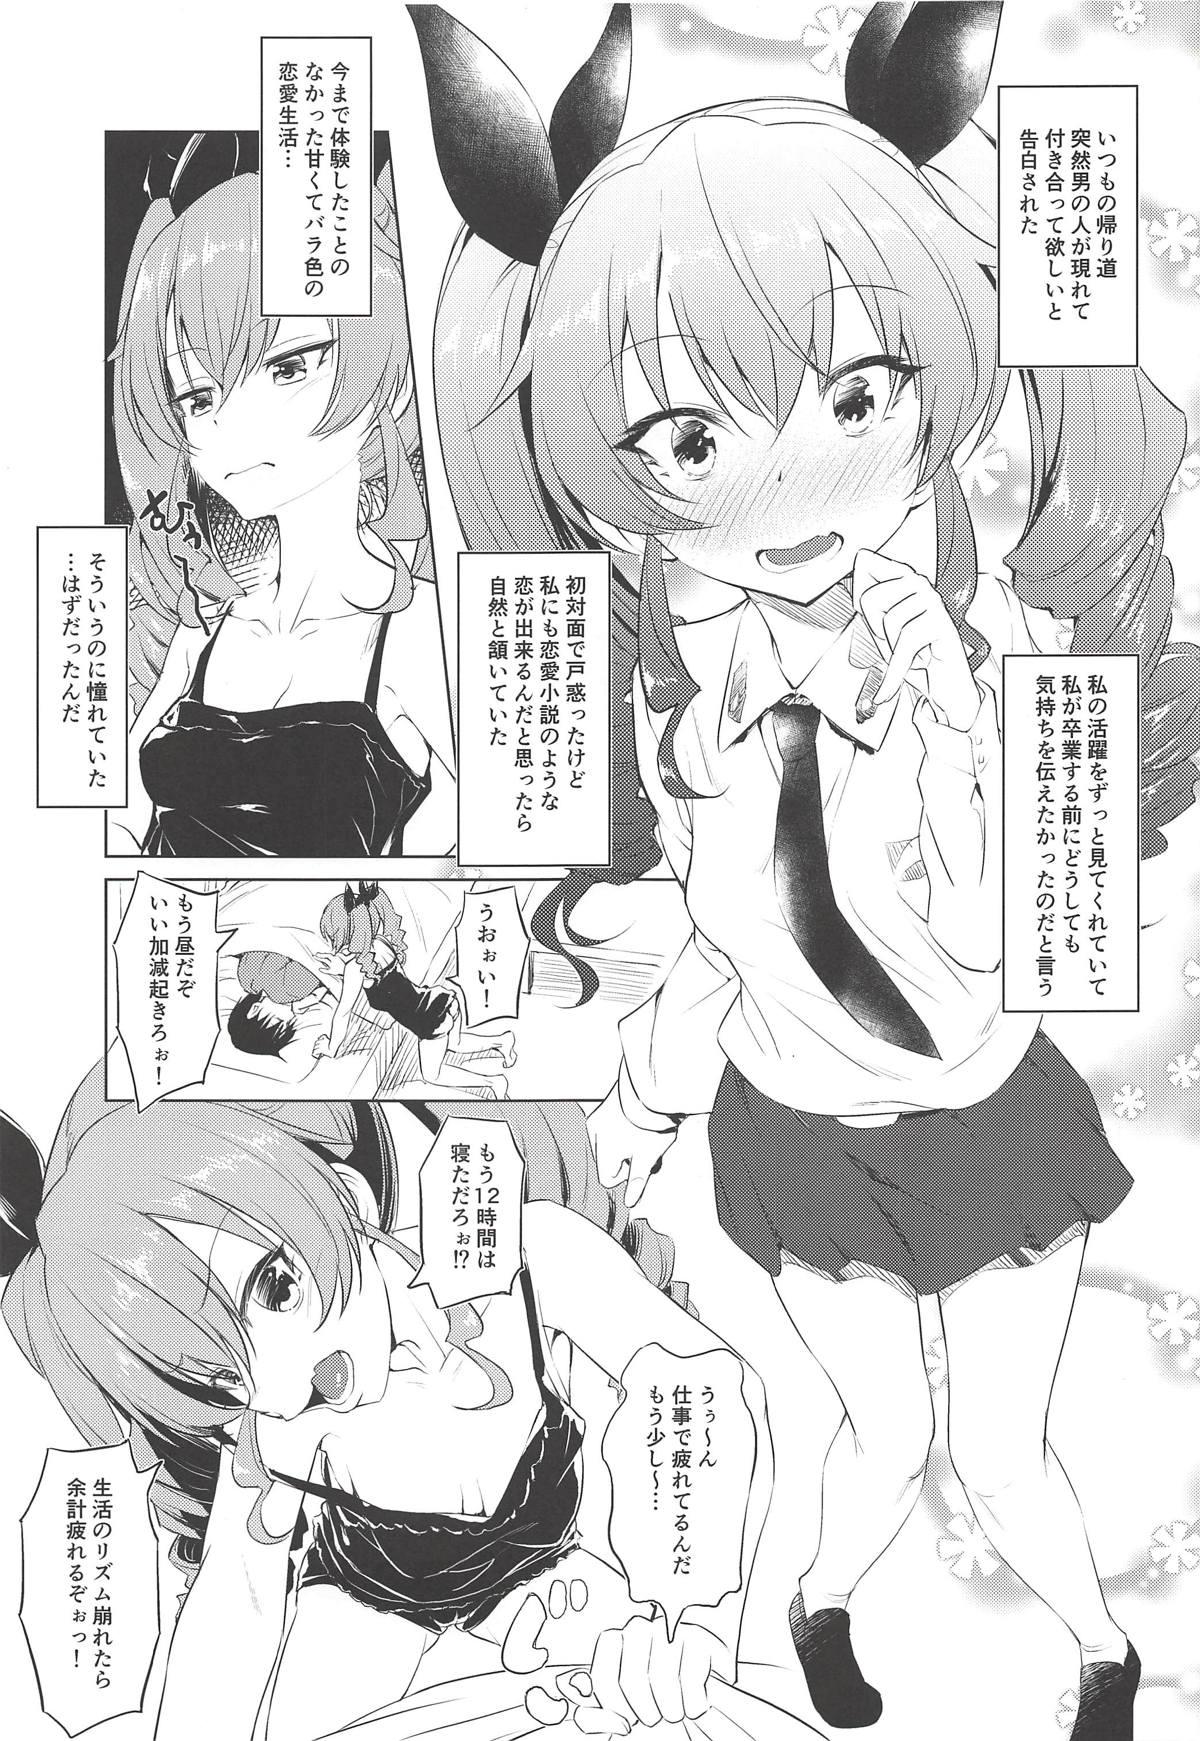 Roleplay Icha Chovy - Girls und panzer Pussy To Mouth - Page 2